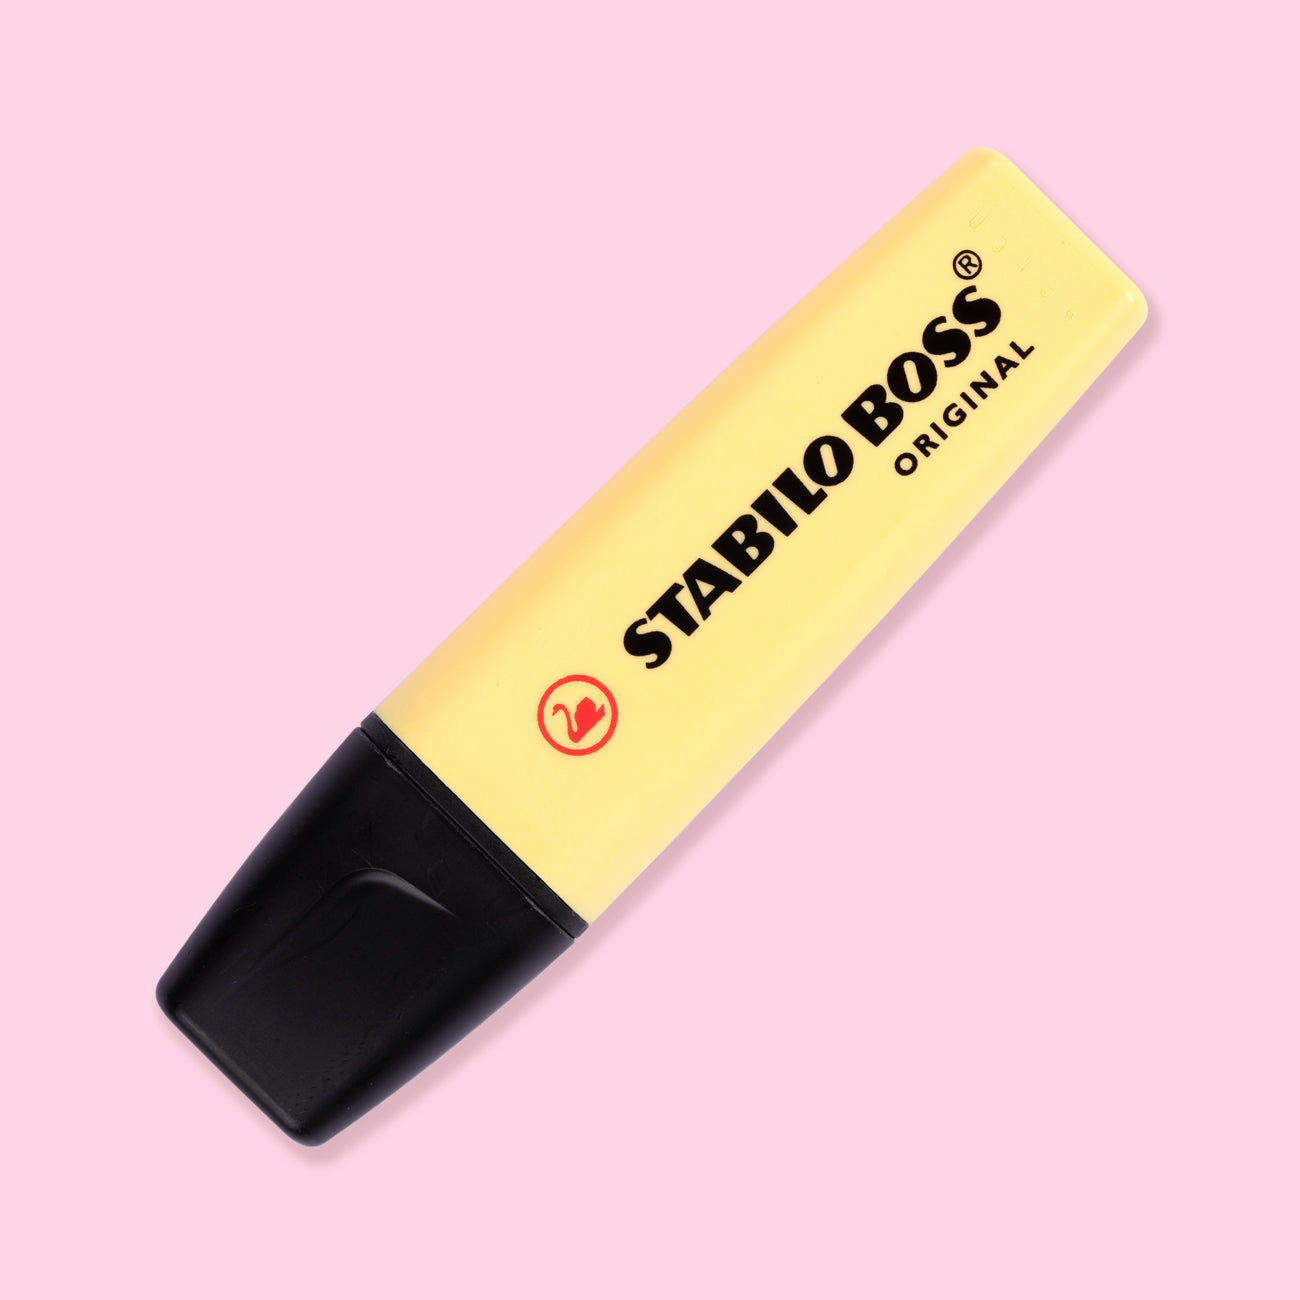 Pack of 8 Stabilo Boss Pastel Highlighters